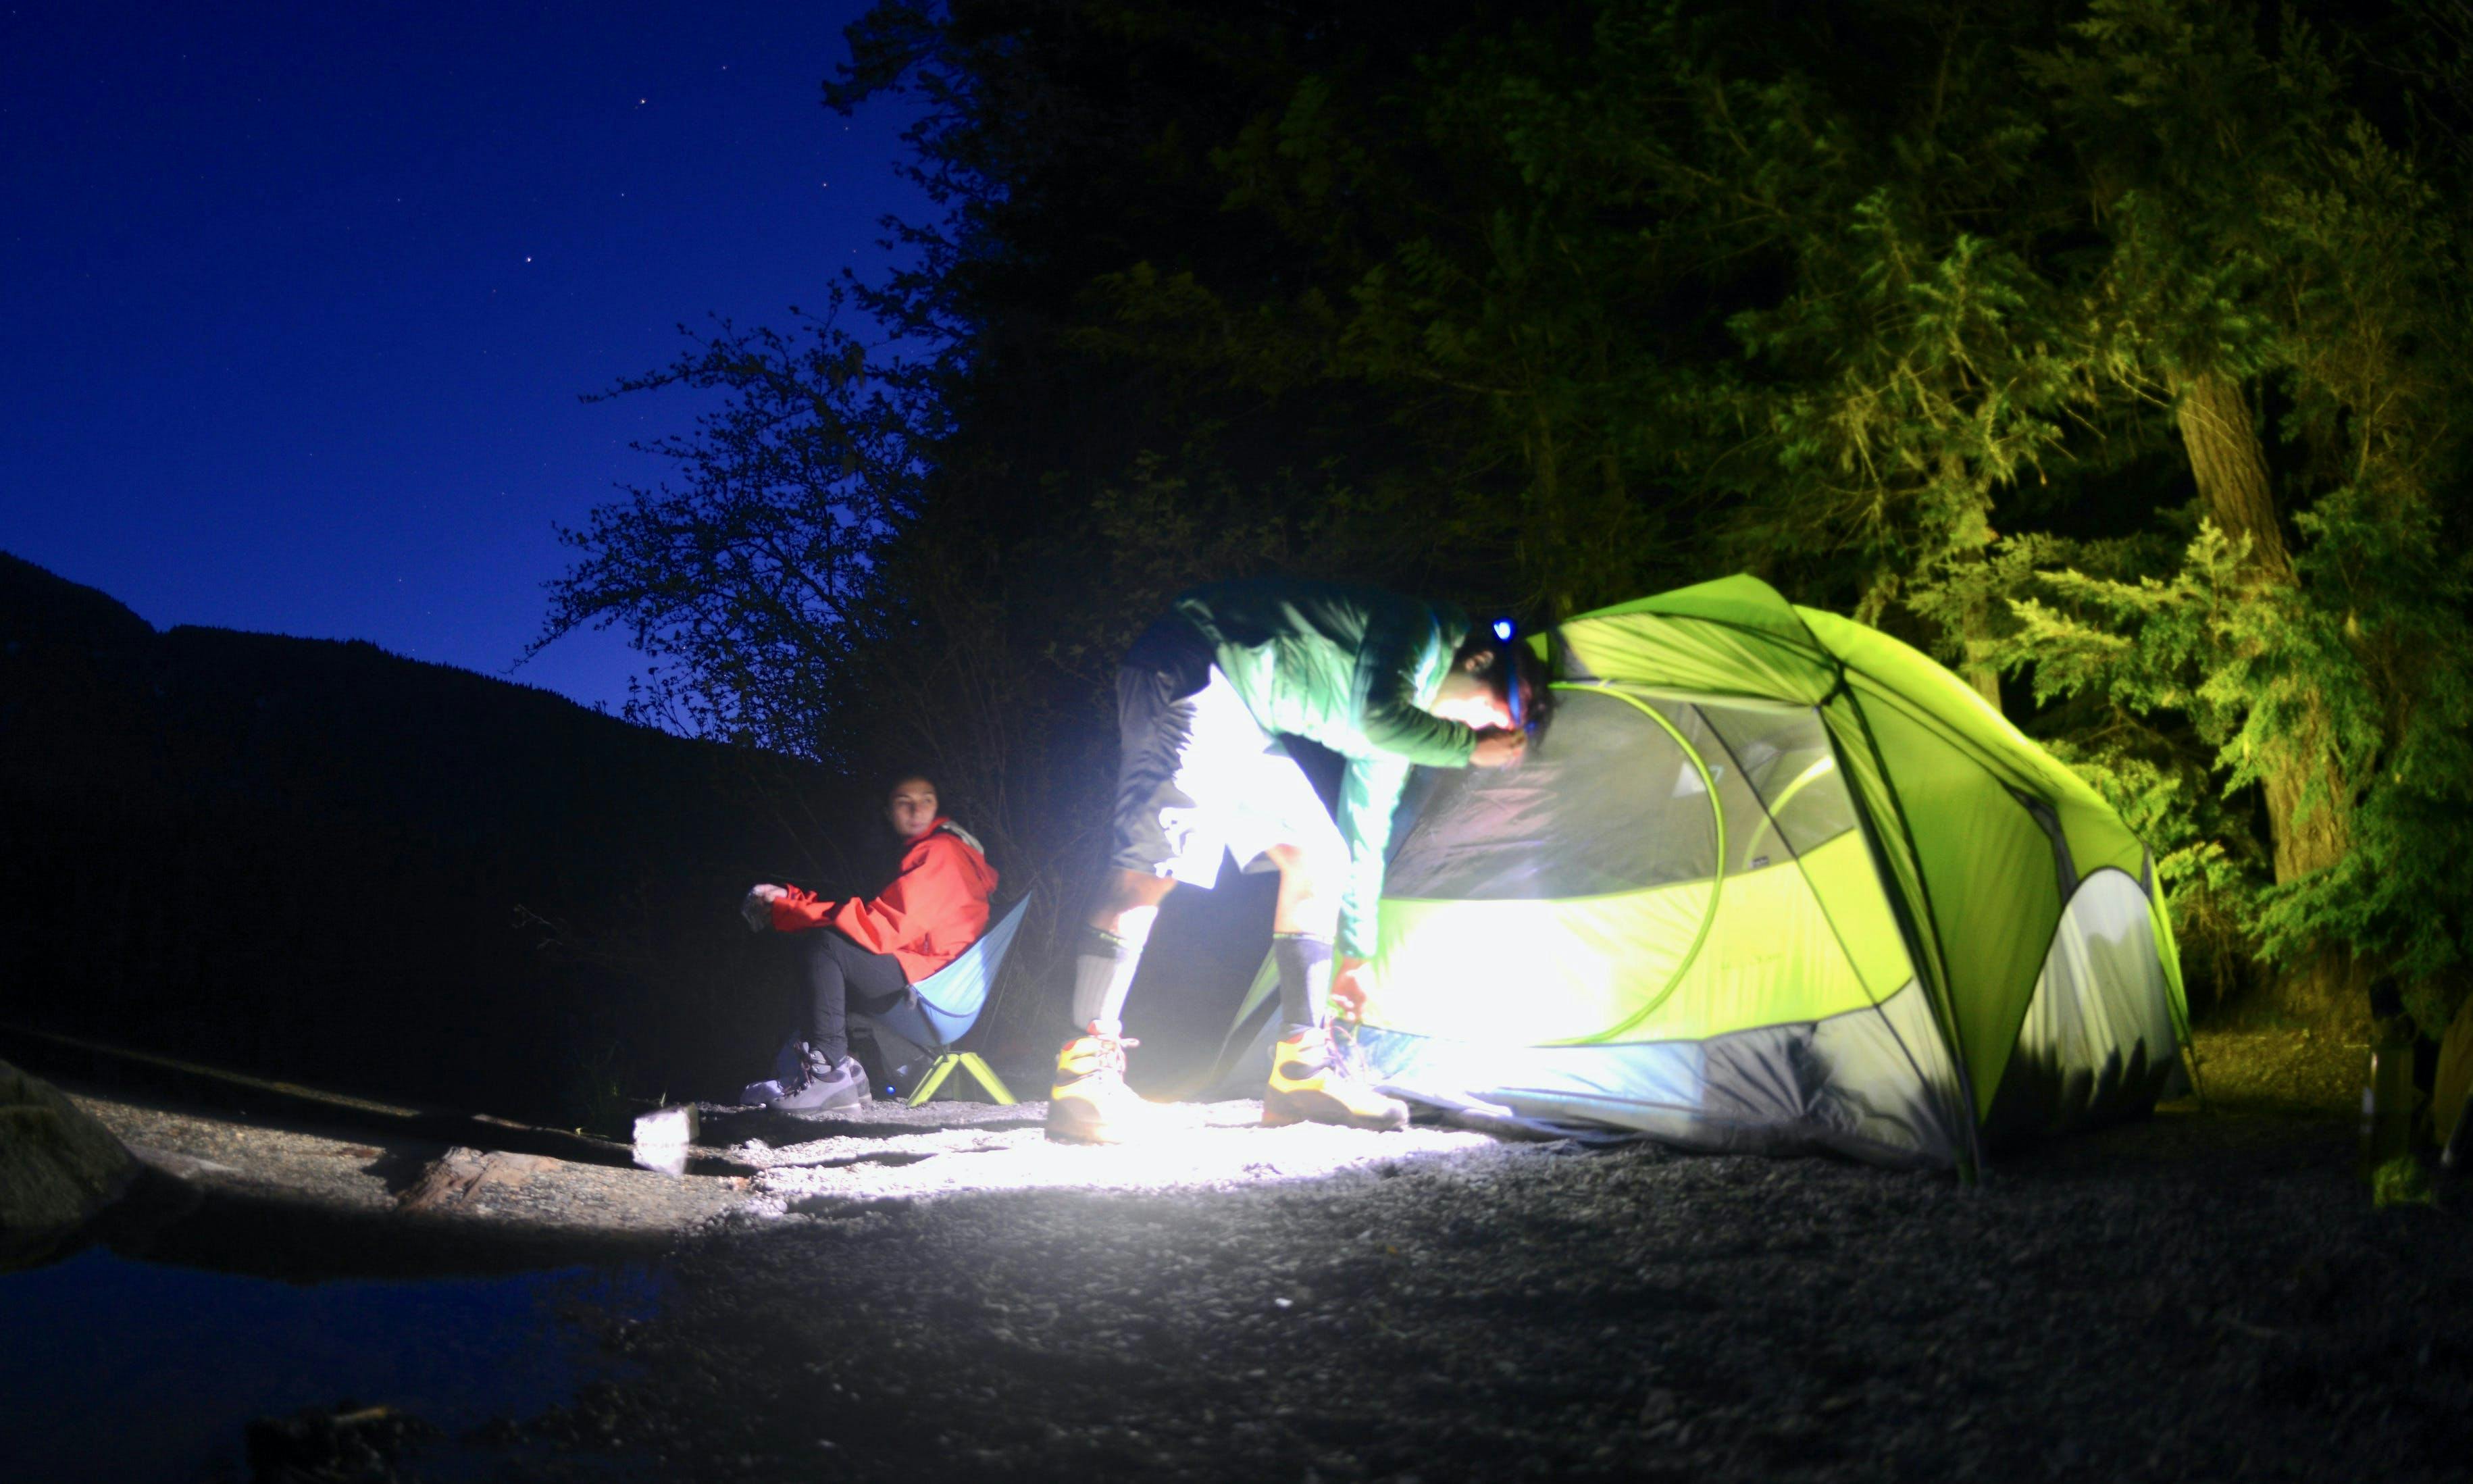 Campers setting up a tent in the dark